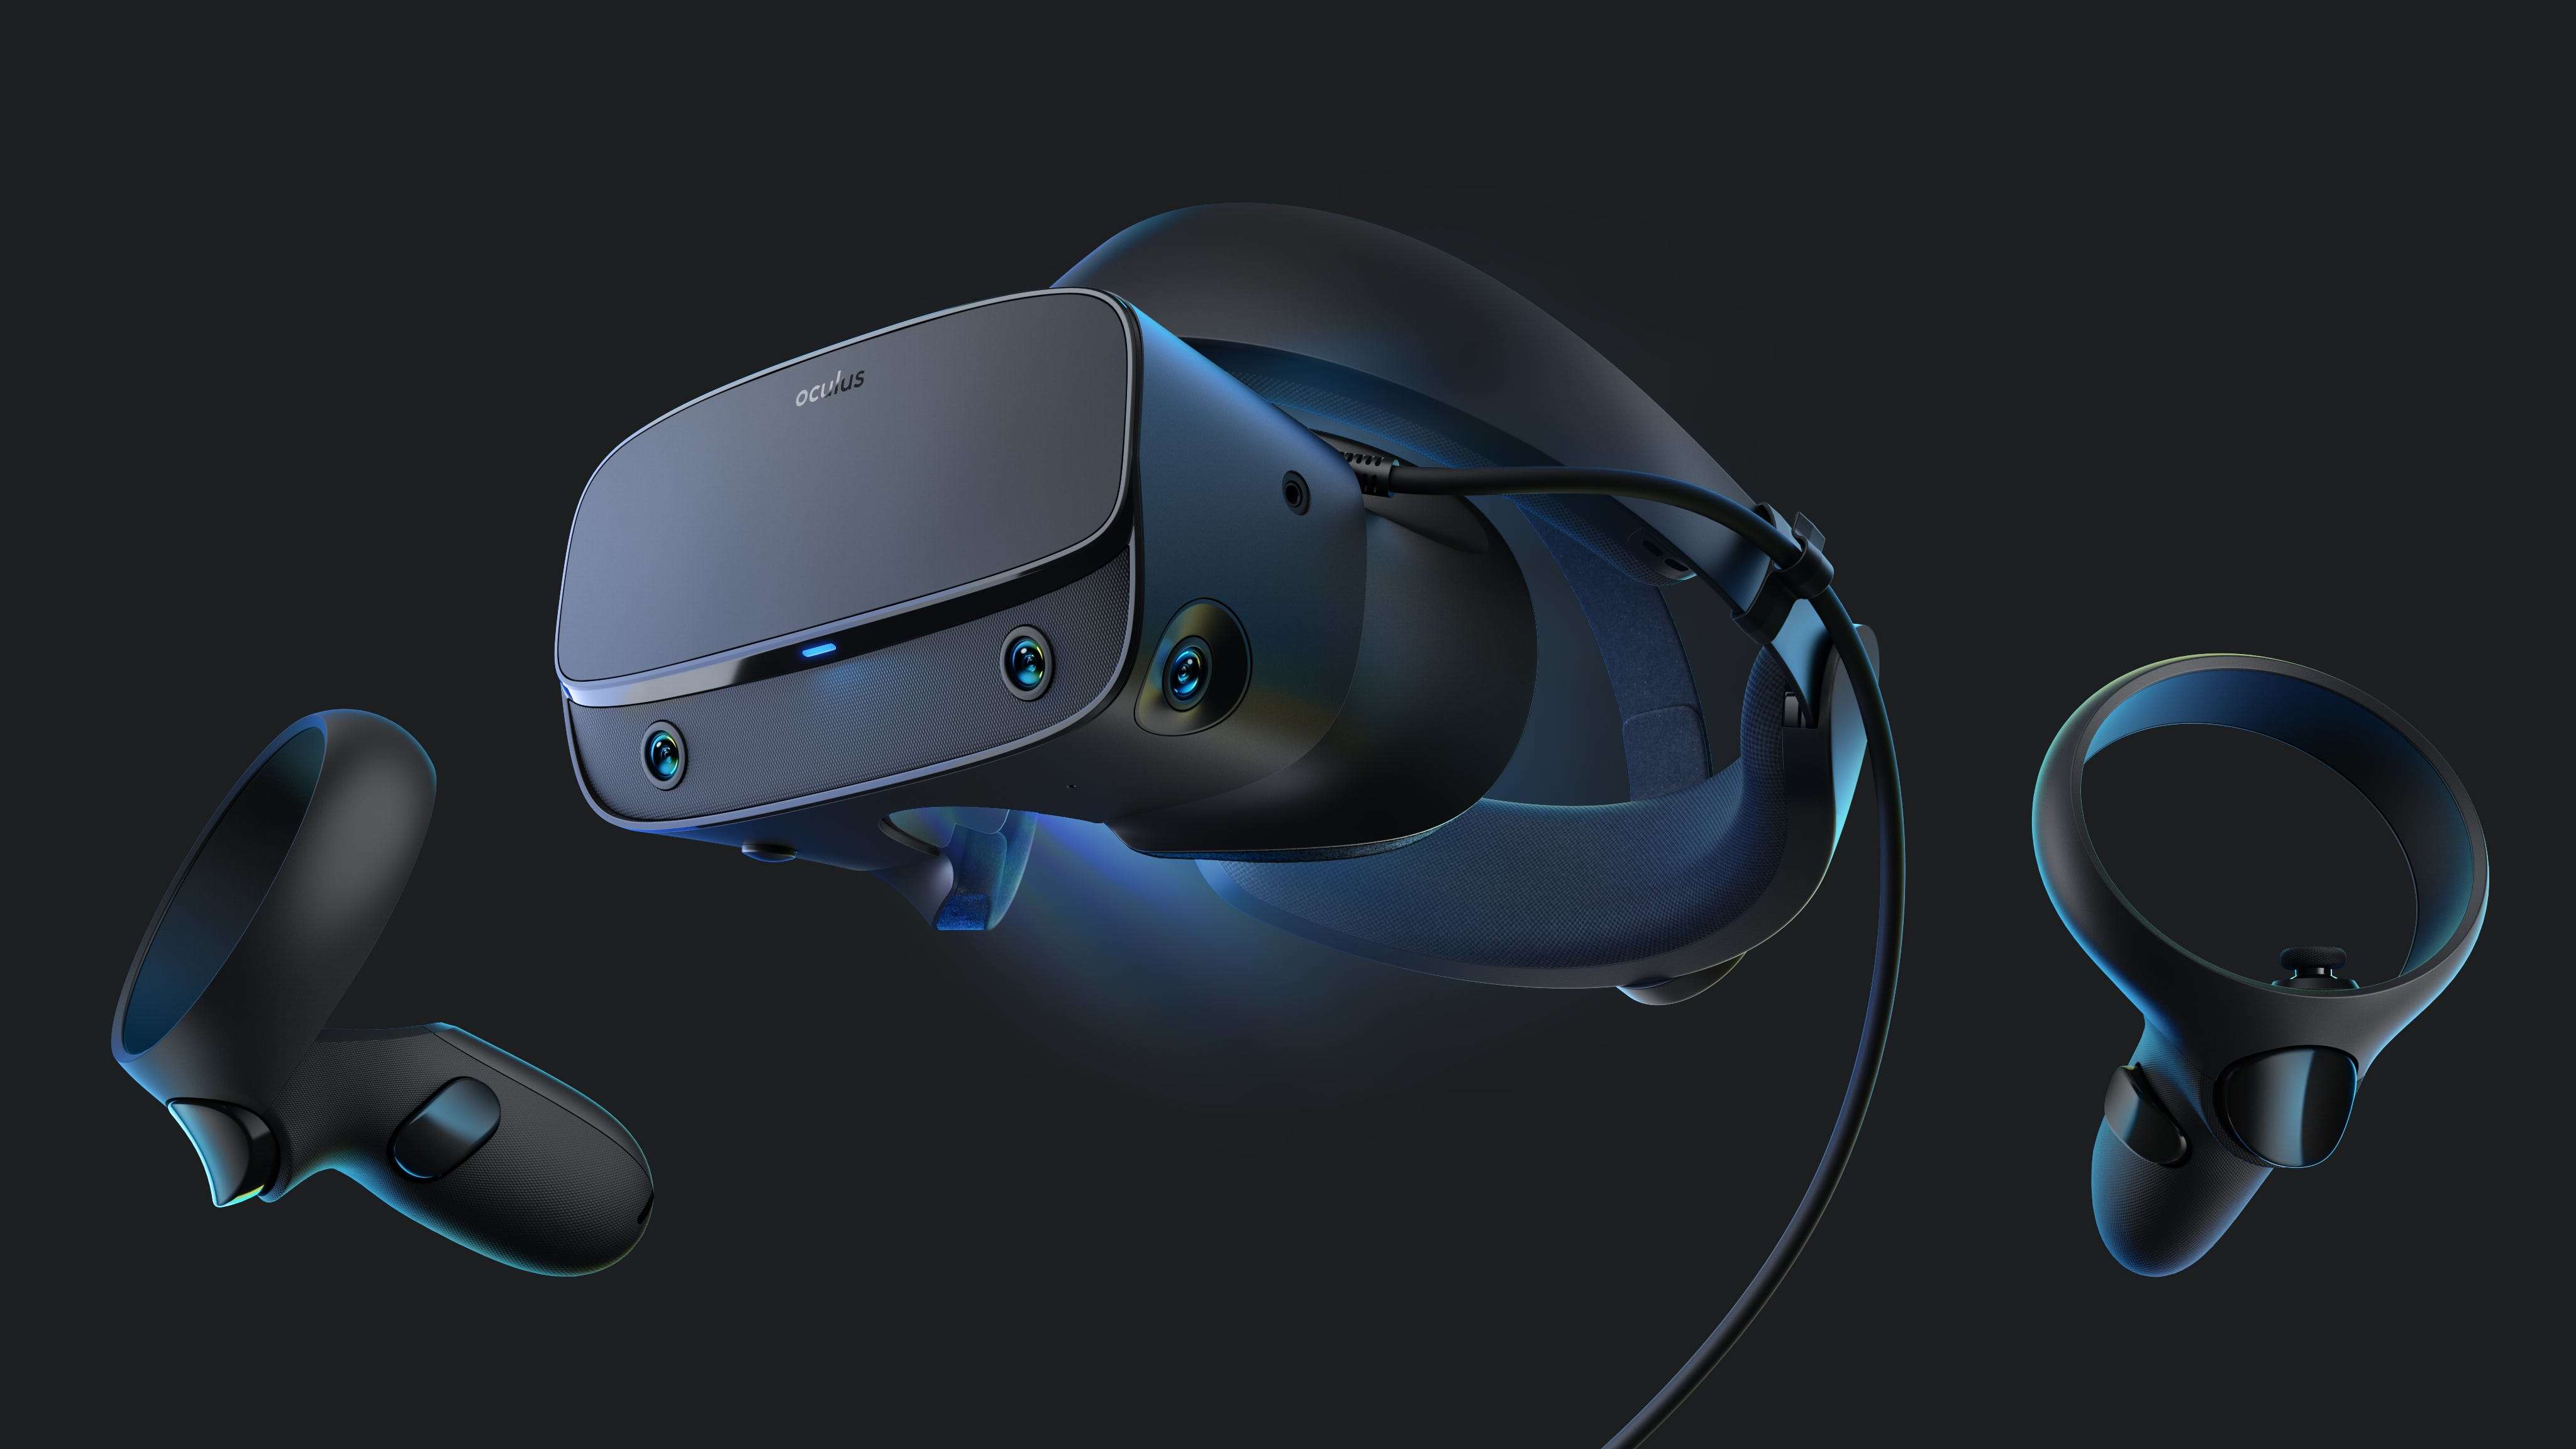 oculus rift sold out everywhere